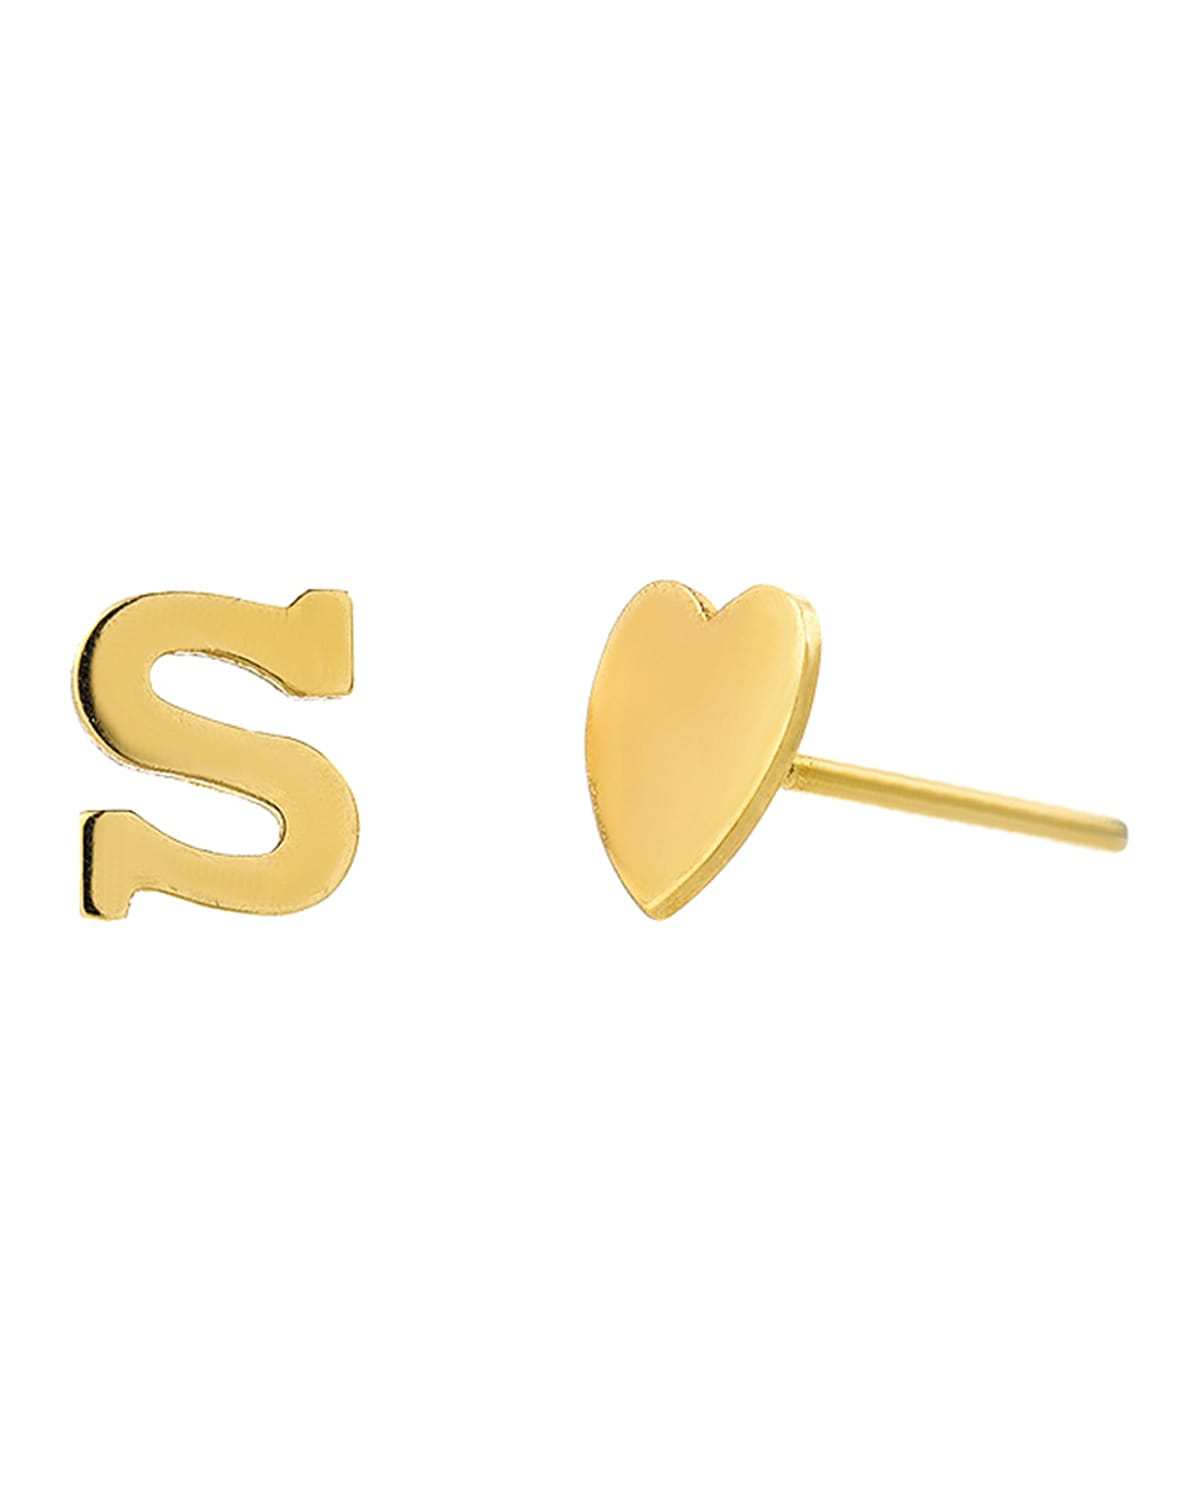 Zoe Lev Jewelry Personalized Mismatched Initial Heart Stud Earrings In 14k Yellow Gold